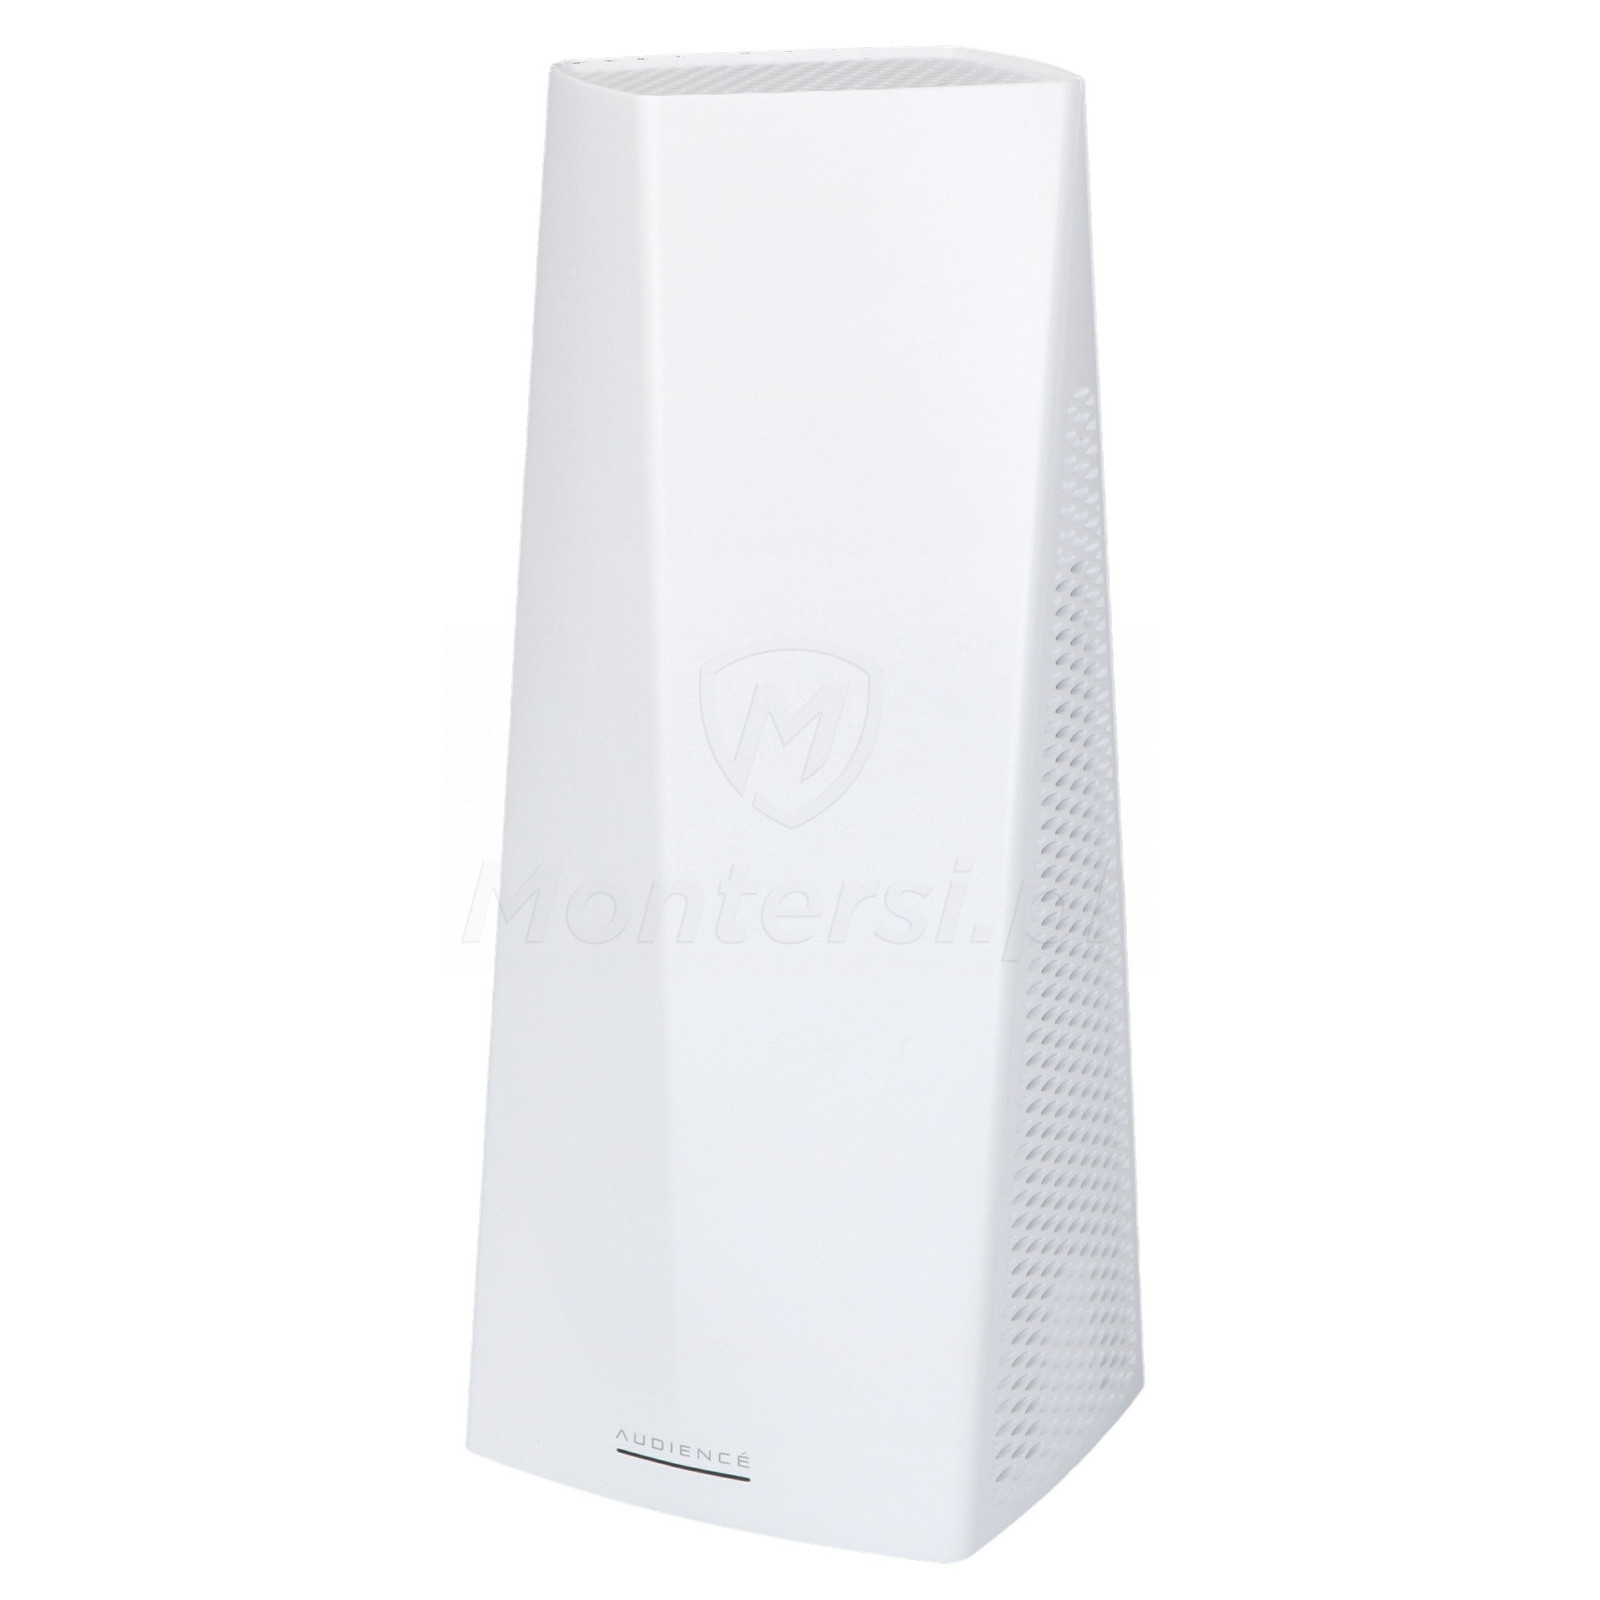 AUDIENCE WIFI - AccesPoint TriBand Mikrotik